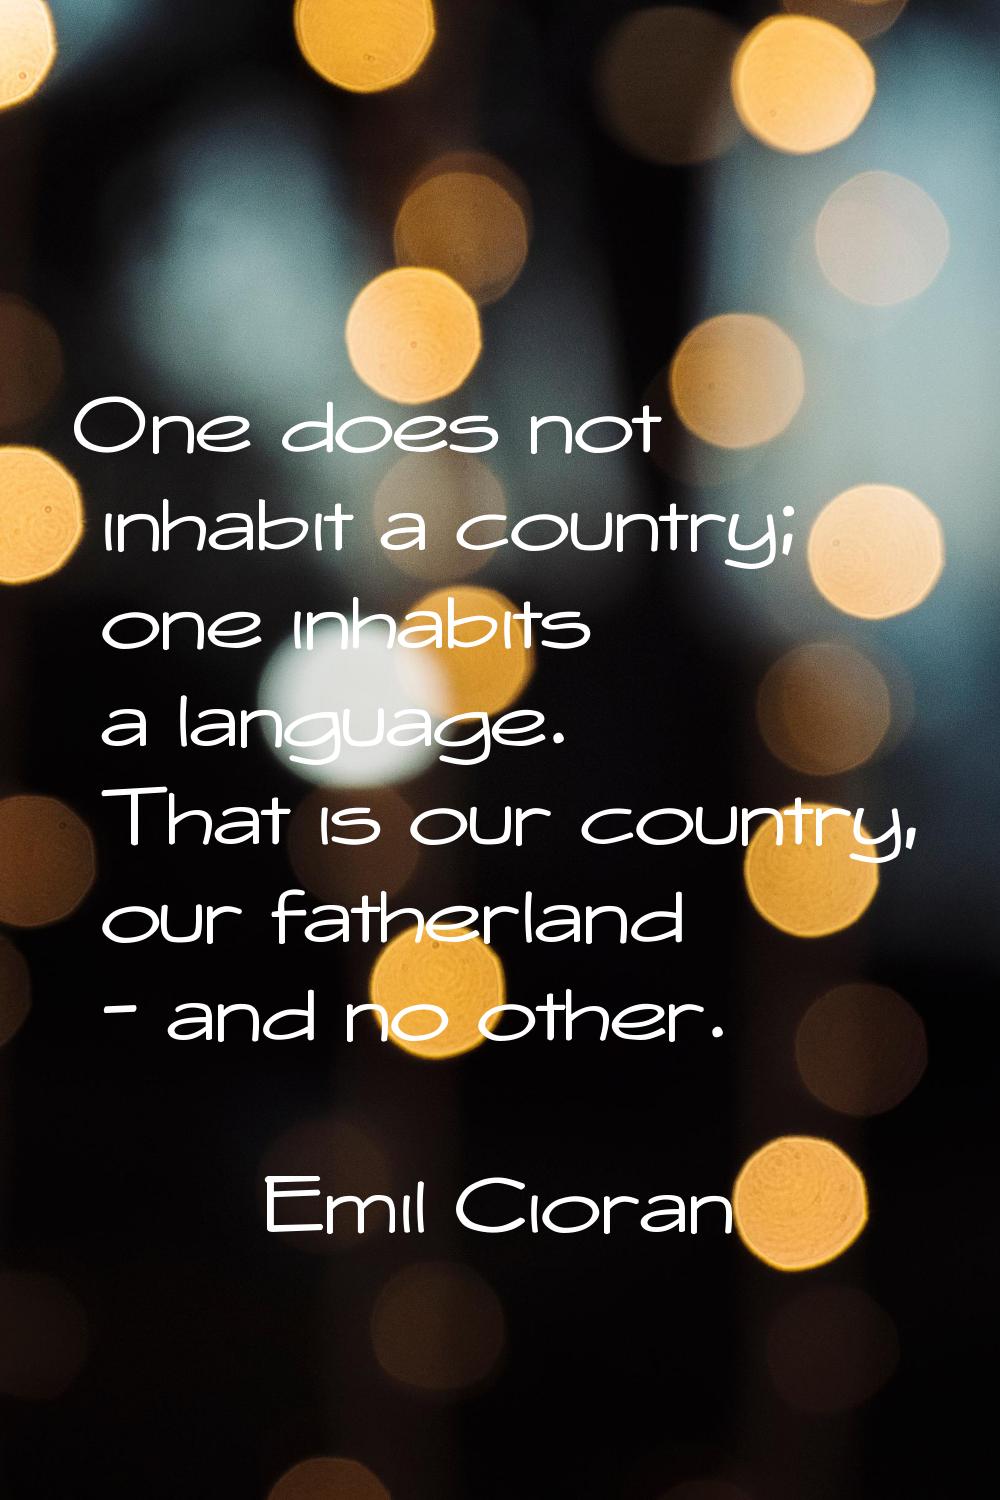 One does not inhabit a country; one inhabits a language. That is our country, our fatherland - and 